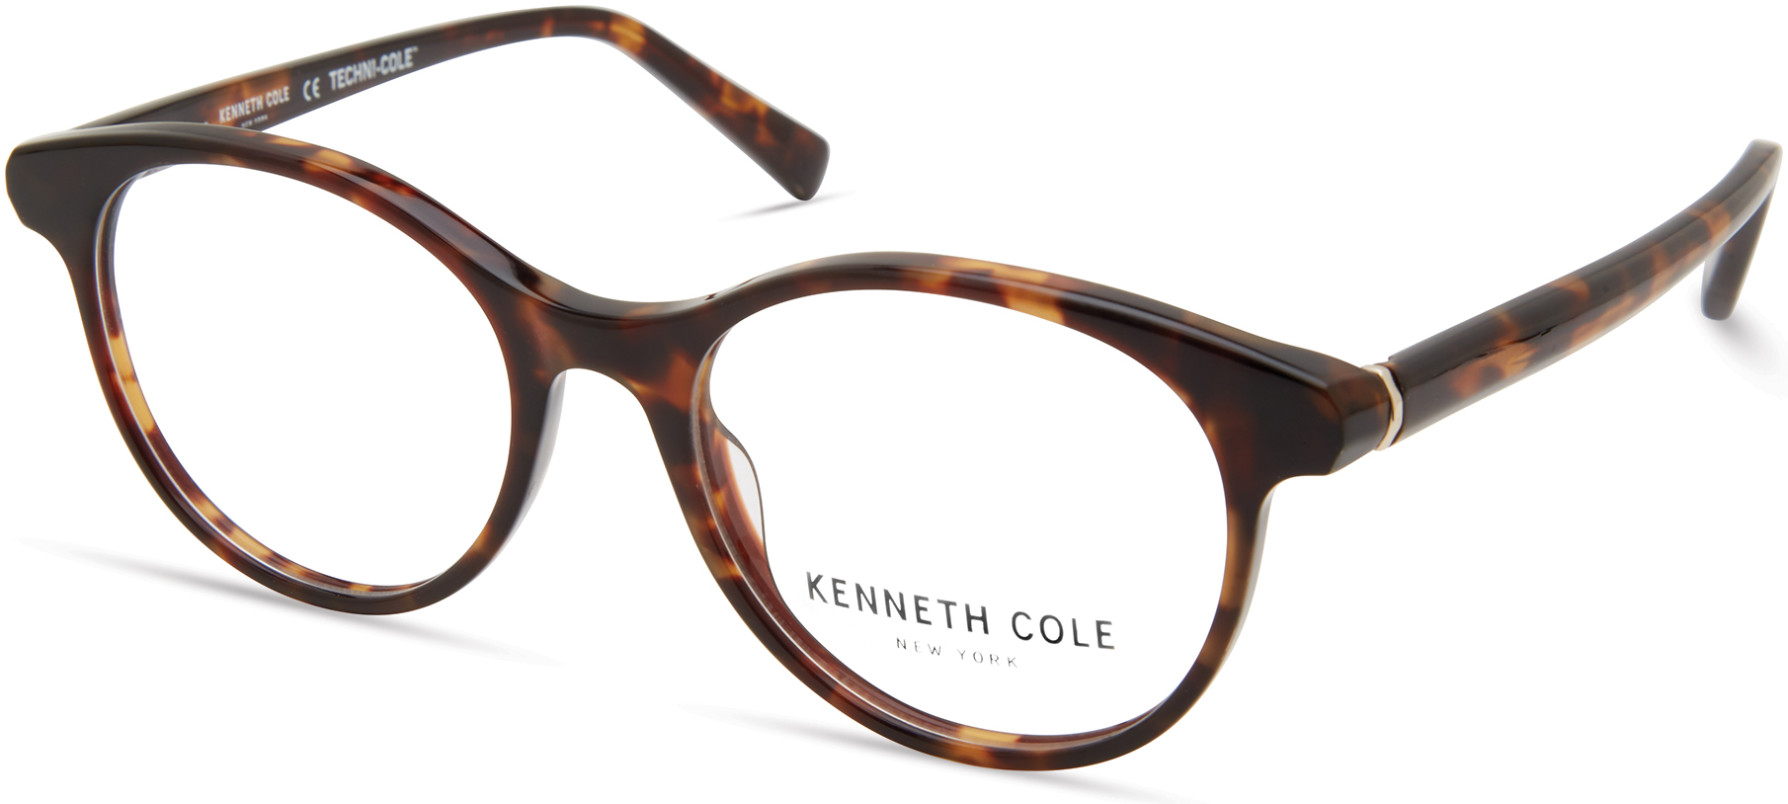 KENNETH COLE NY 0325 052